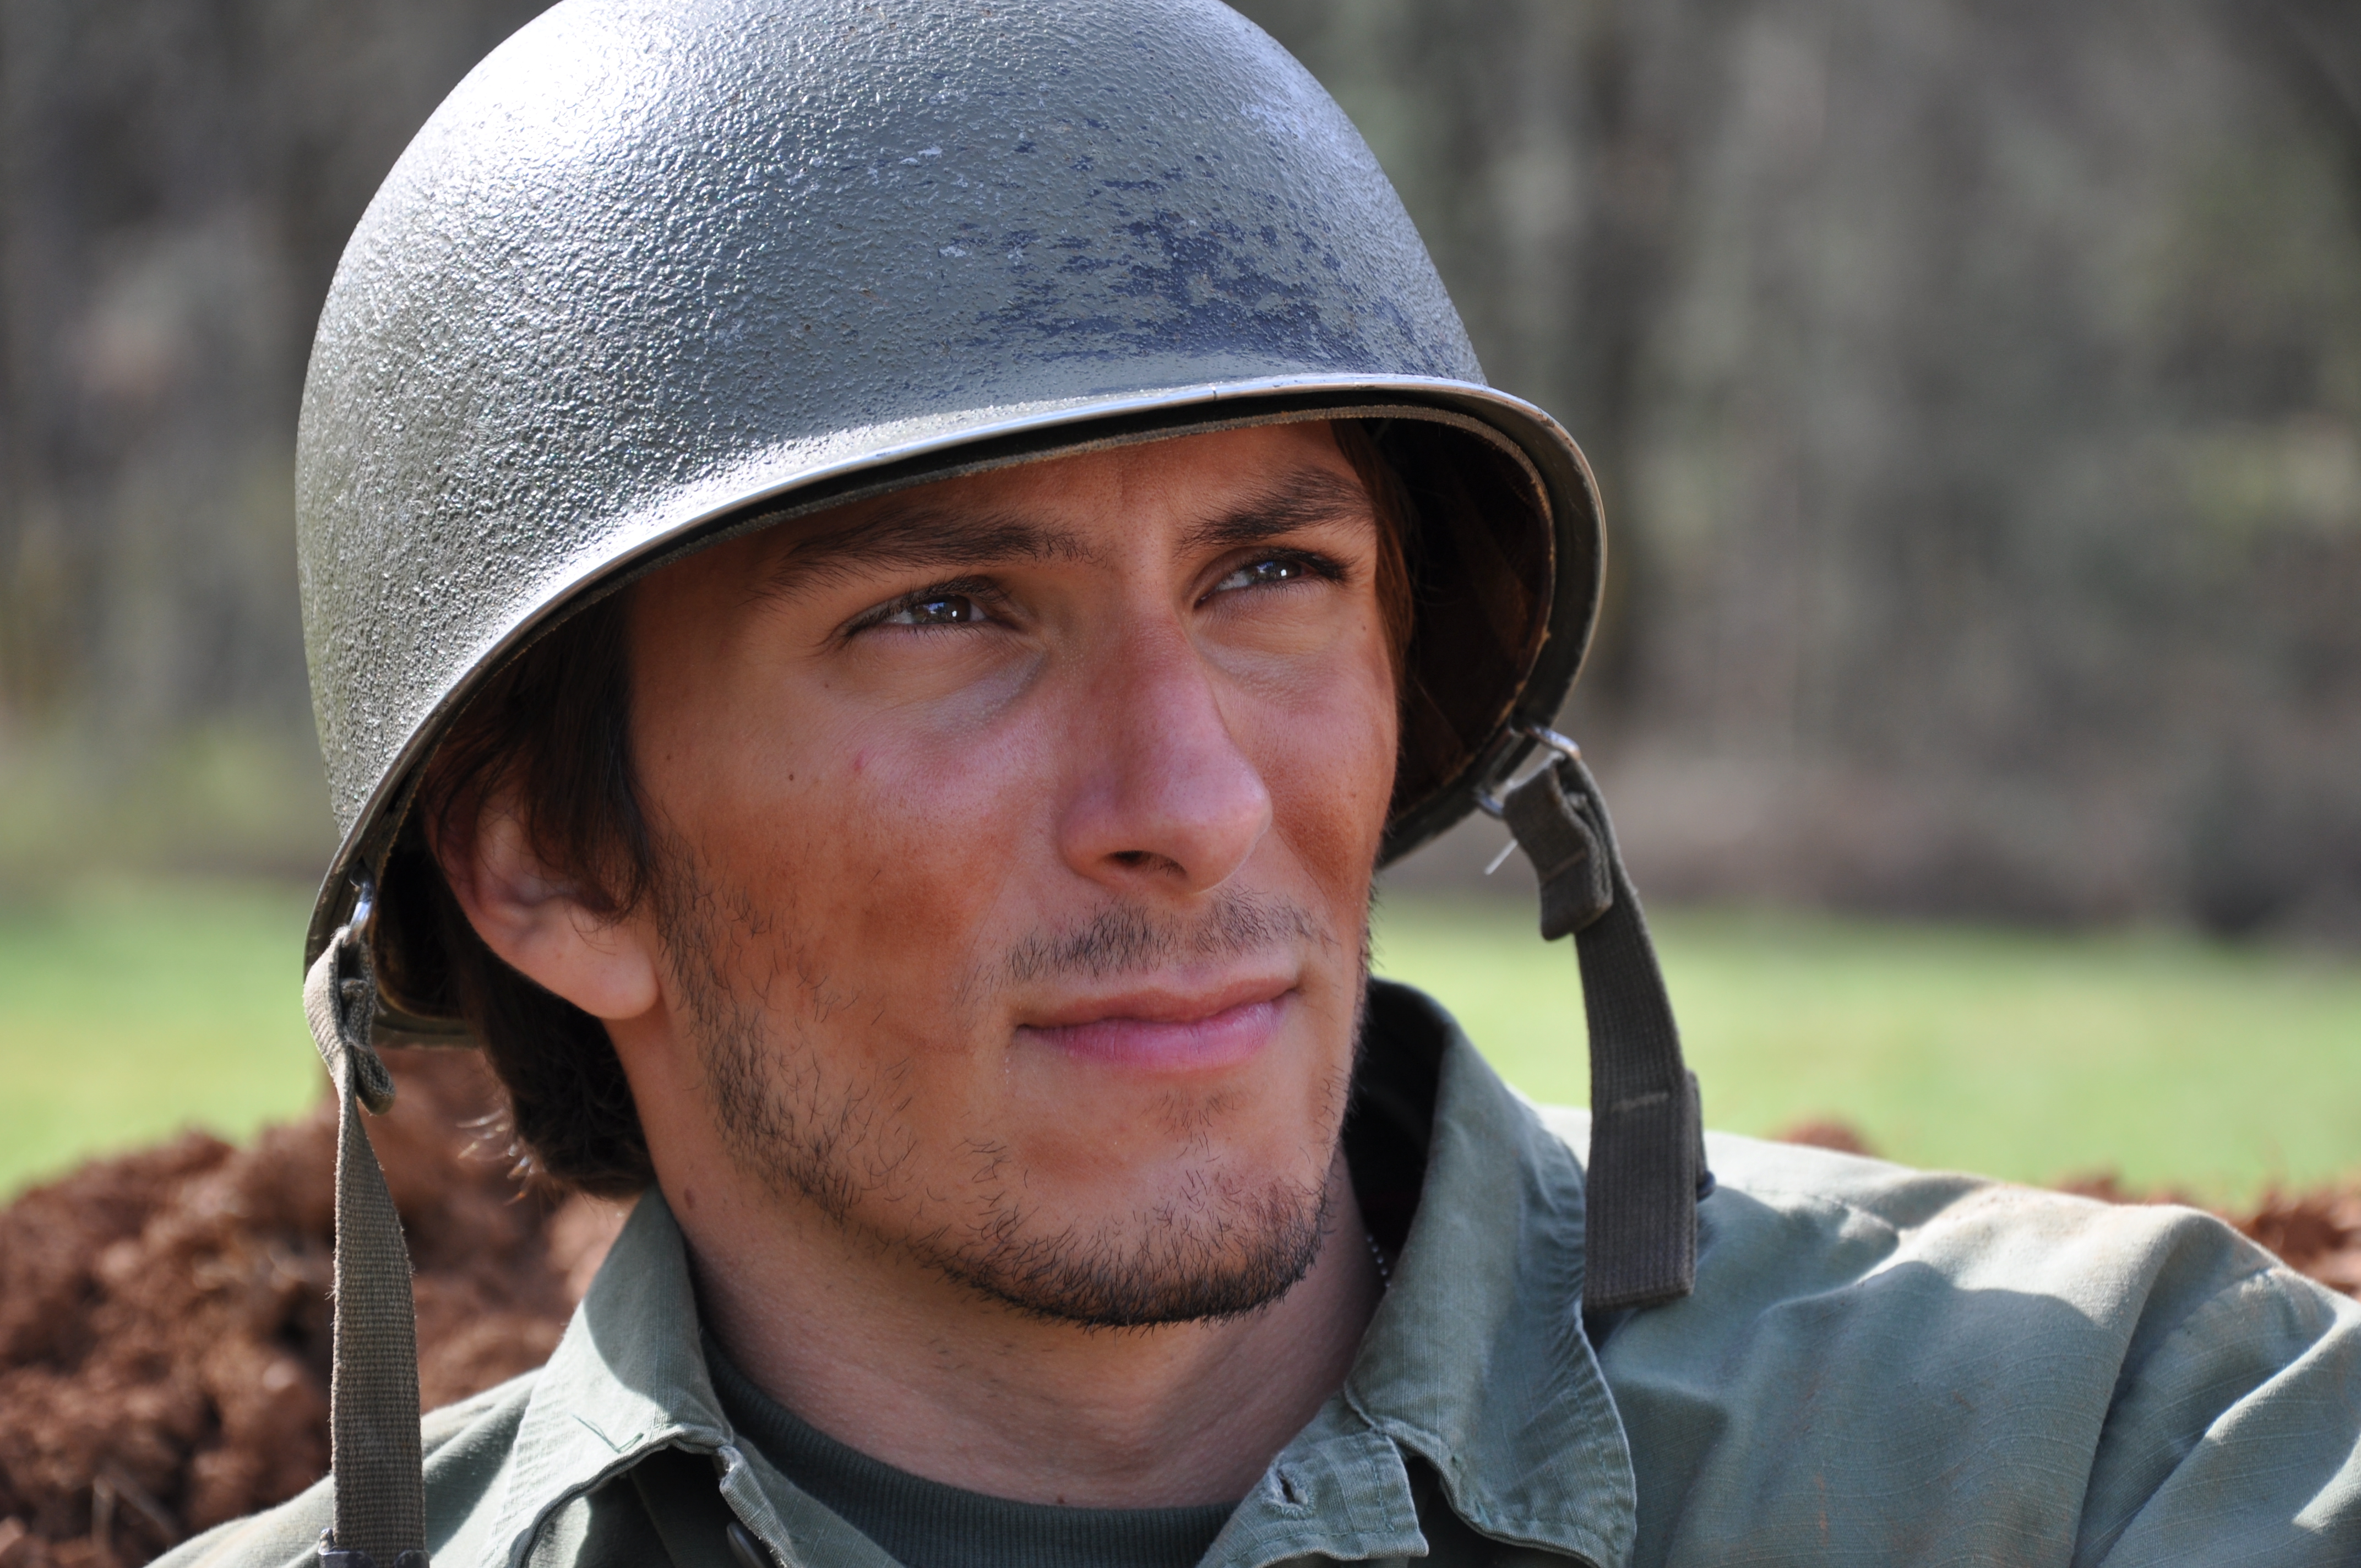 Dylan Saccoccio as Joseph Rhodes in the independent WWII film 